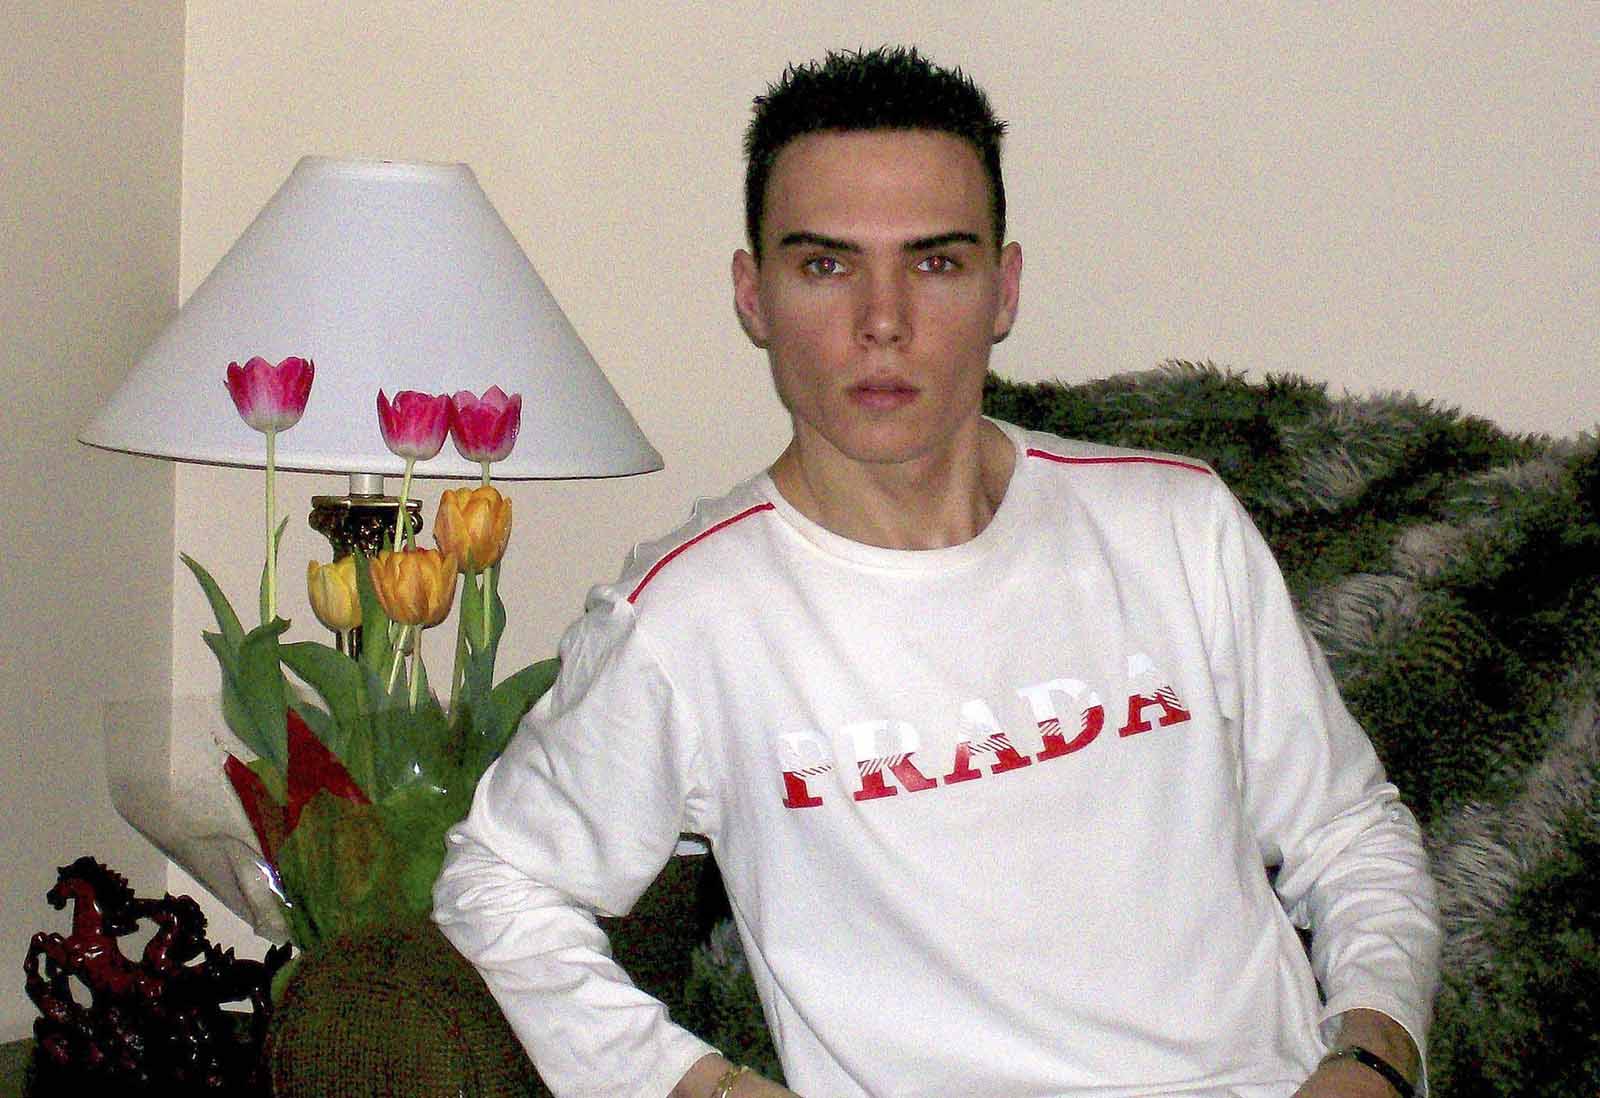 You may know Luka Magnotta's name thanks to the Netflix series 'Don't F*** With Cats'. But Magnotta is much darker than just an animal abuser. 